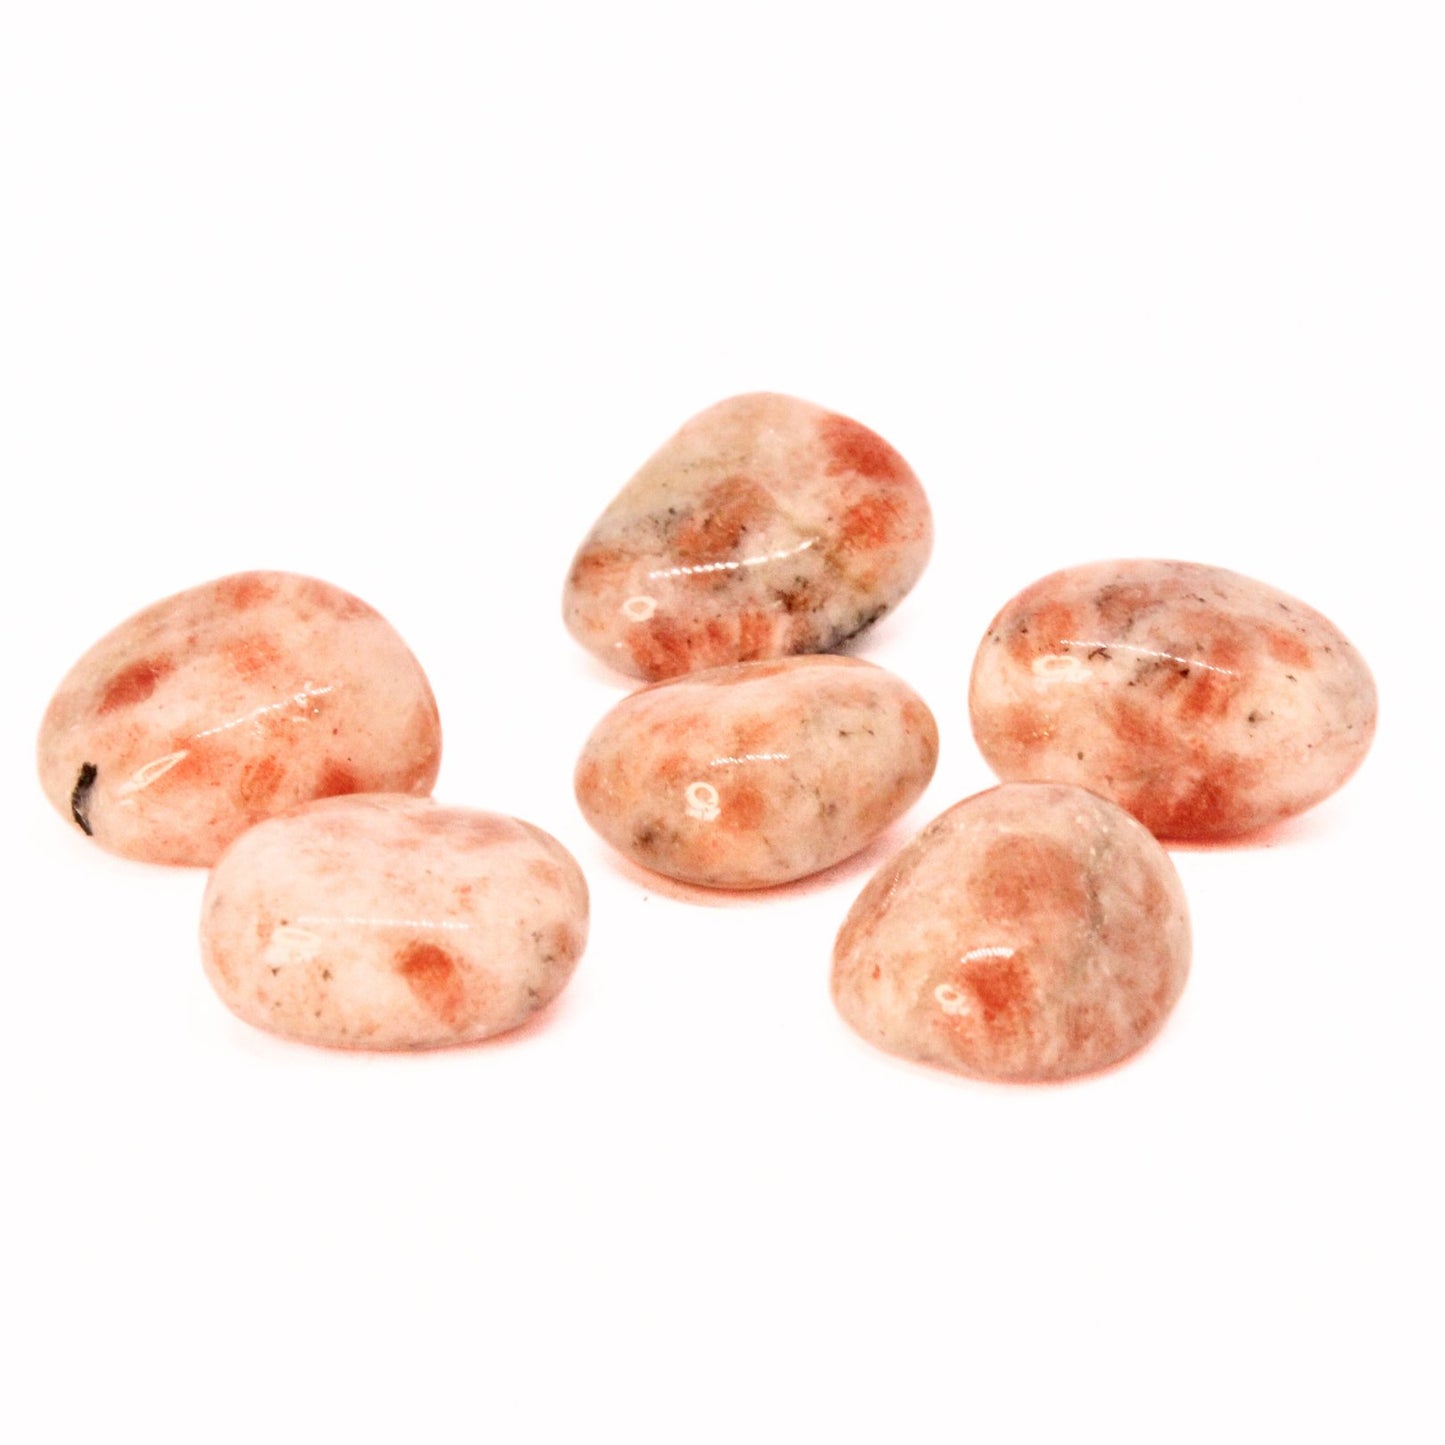 Sunstone Tumble - Conscious Crystals New Zealand Crystal and Spiritual Shop